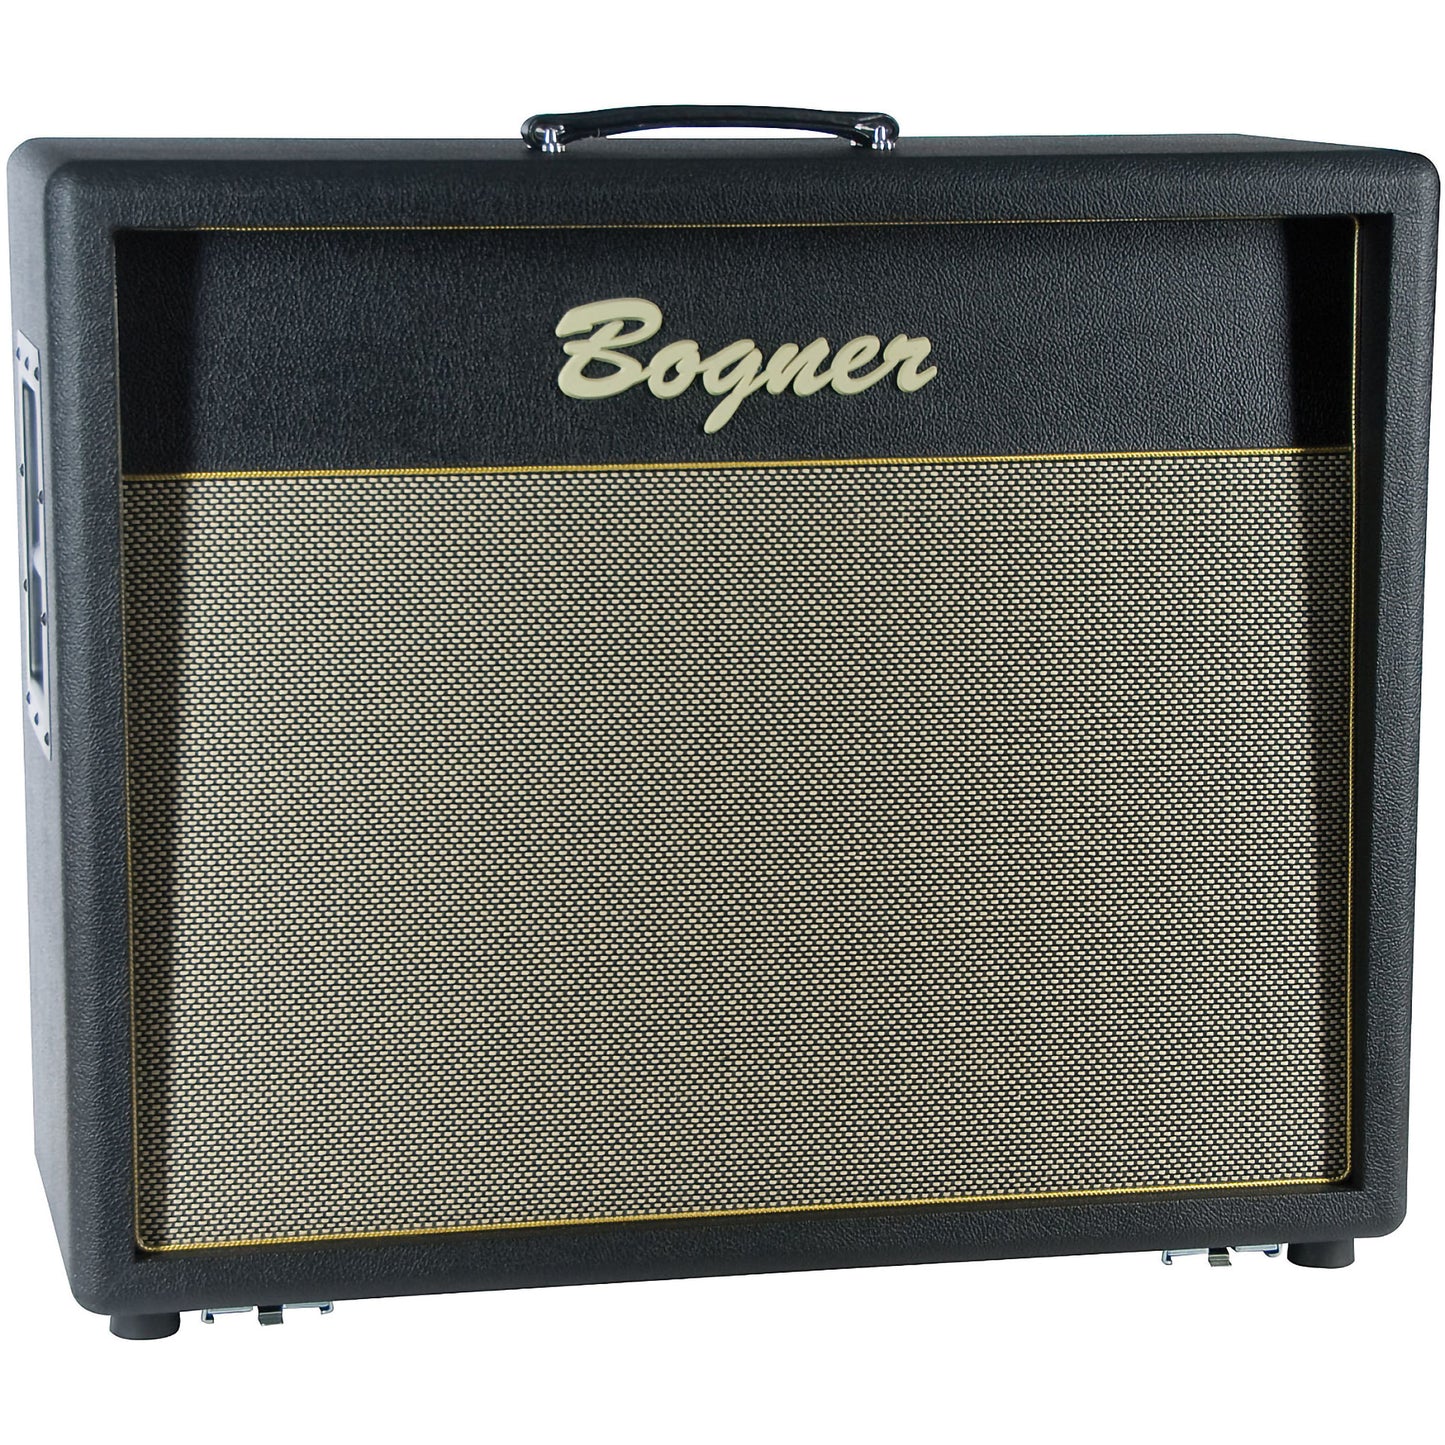 Bogner 212CH Helios 2x12” Closed Back Oversized Cabinet